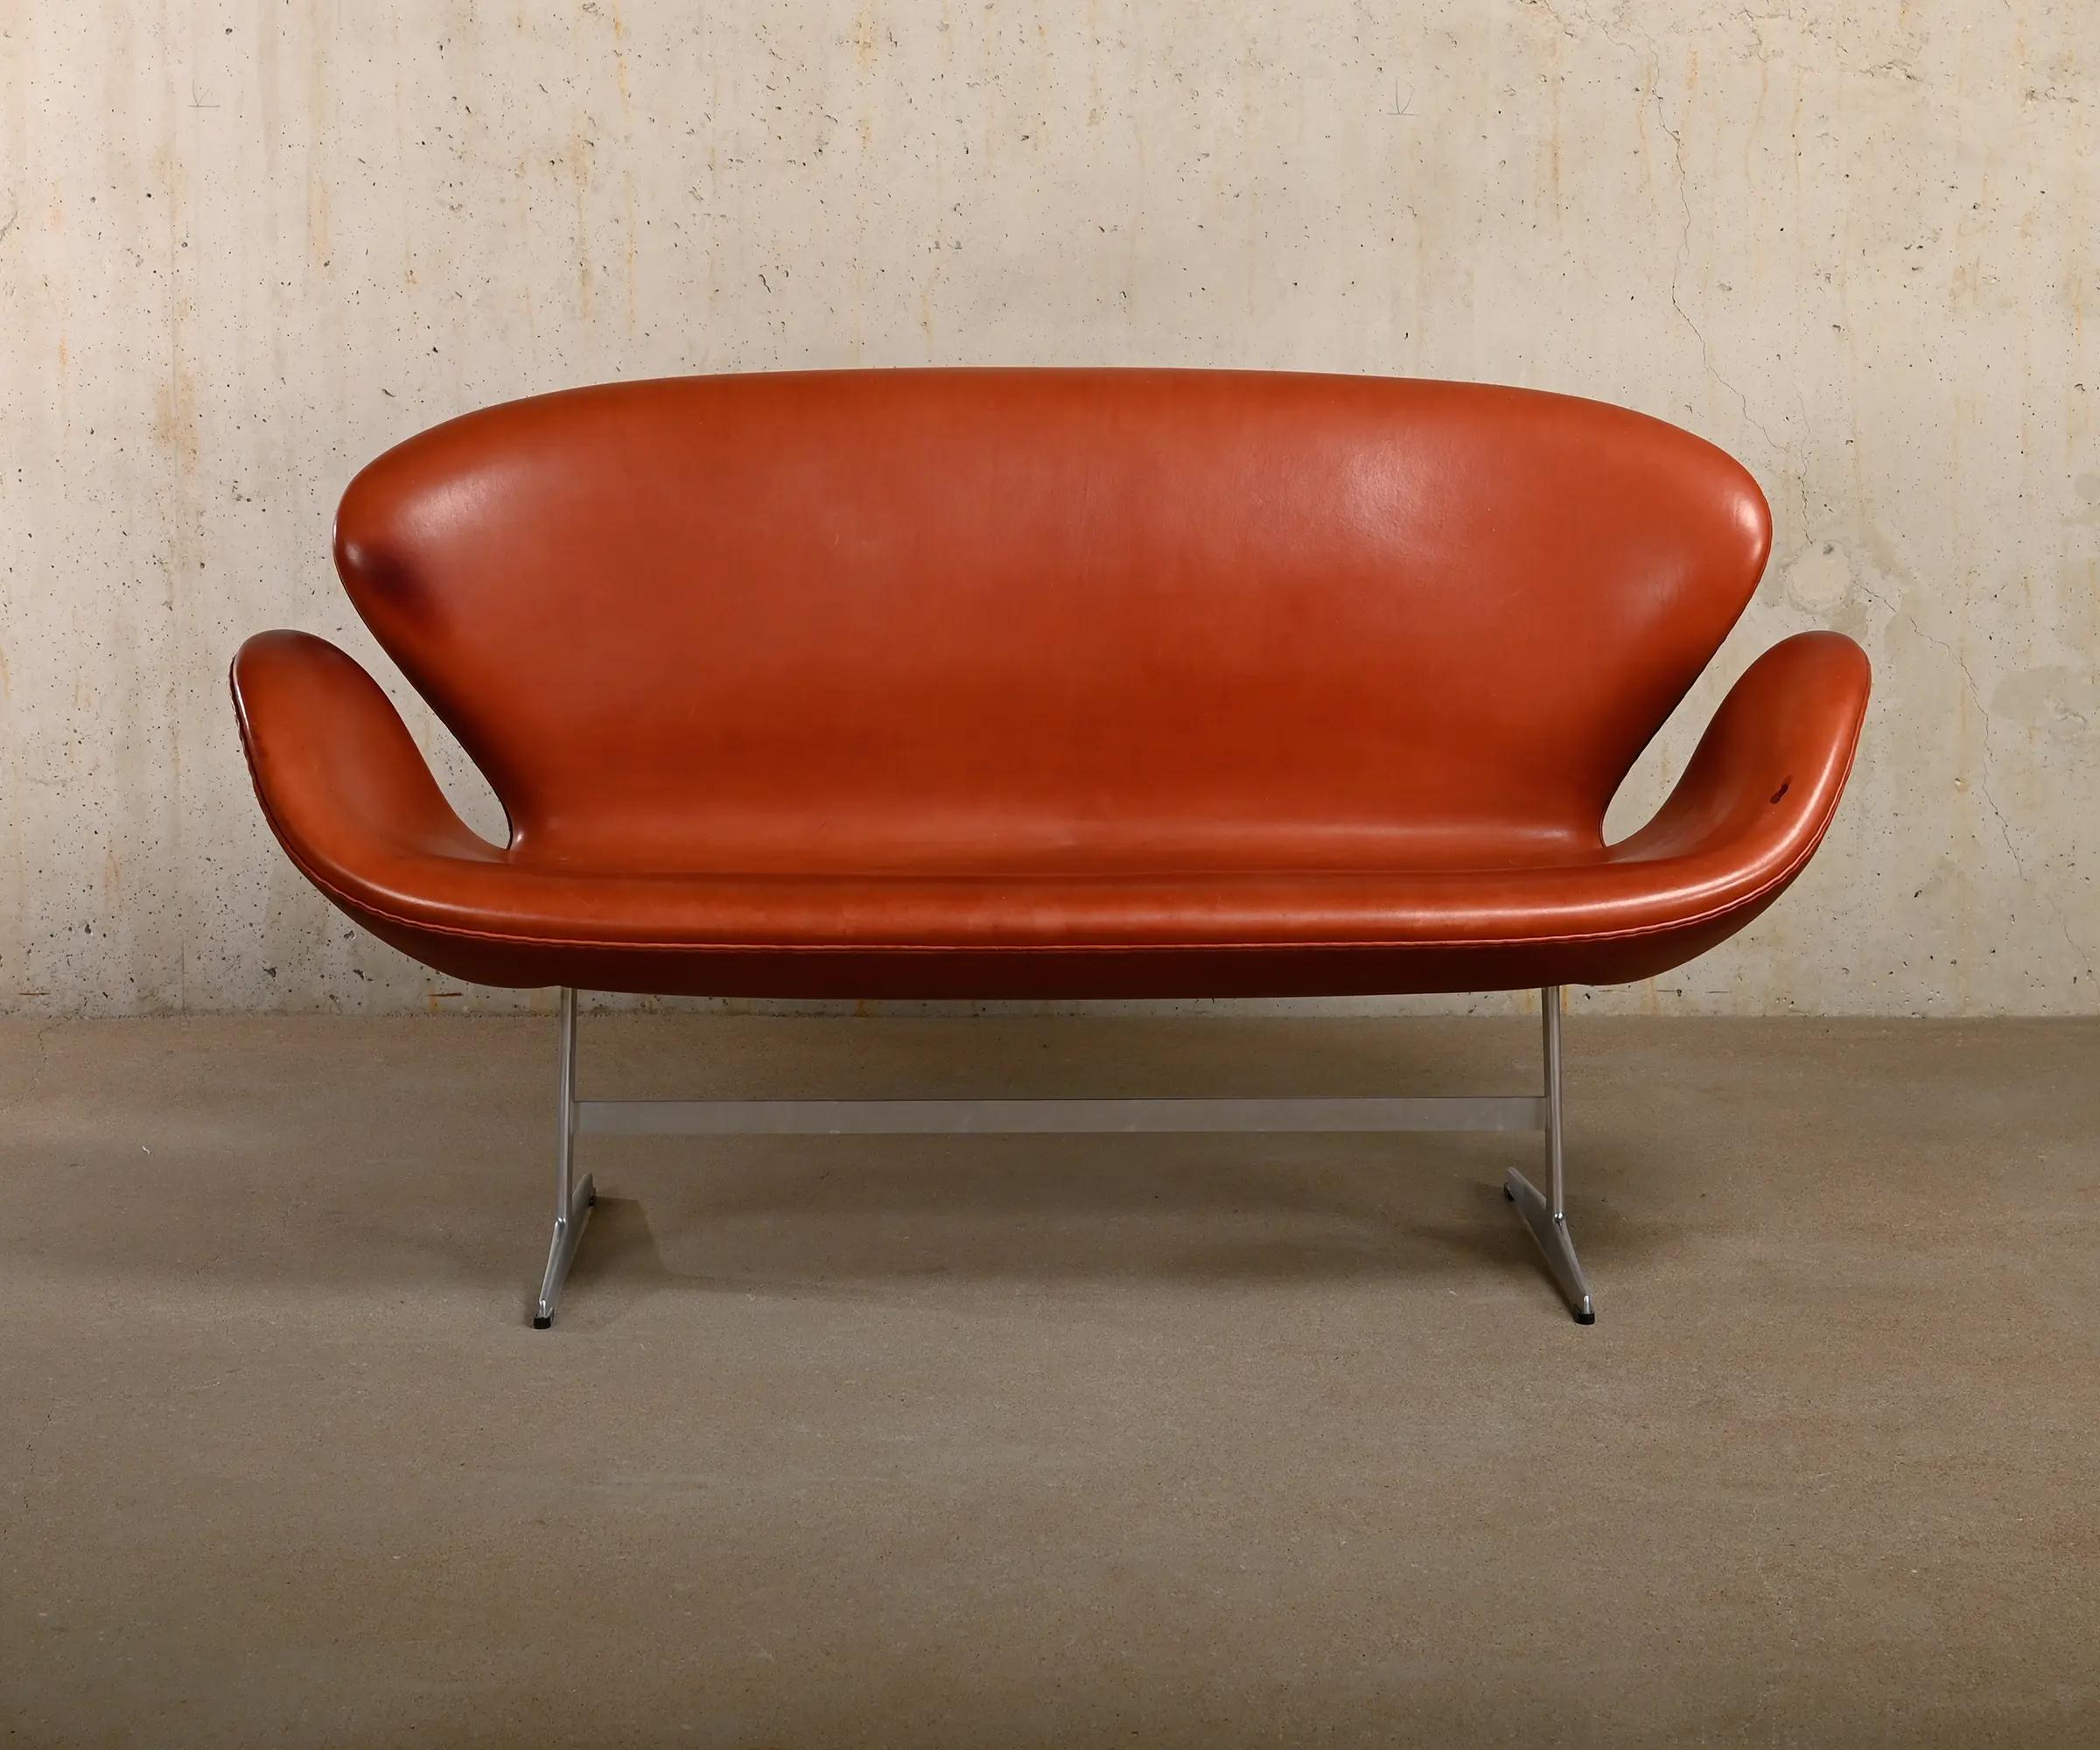 Iconic design from 1958 by Arne Jacobsen for the SAS Royal Hotel in Copenhagen Denmark (known now as the Radisson Blu Royal Hotel). This (re-)edition of the Swan Sofa (Model 3321) was manufactured by Fritz Hansen in 2007 and remains faithful to the